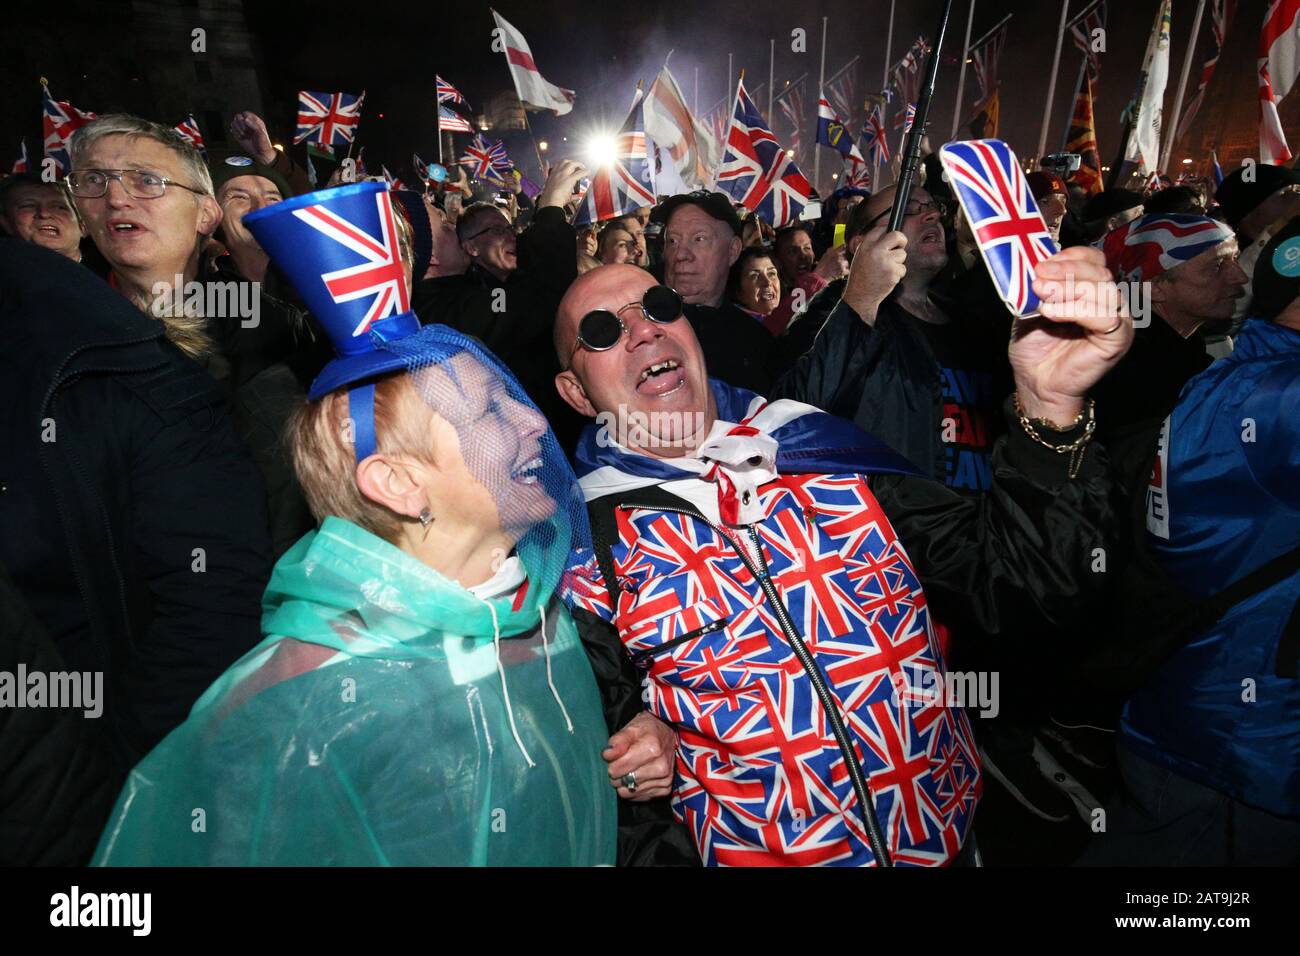 Pro-Brexit supporters in Parliament Square, London, as the UK prepares to leave the European Union, ending 47 years of close and sometimes uncomfortable ties to Brussels. Stock Photo